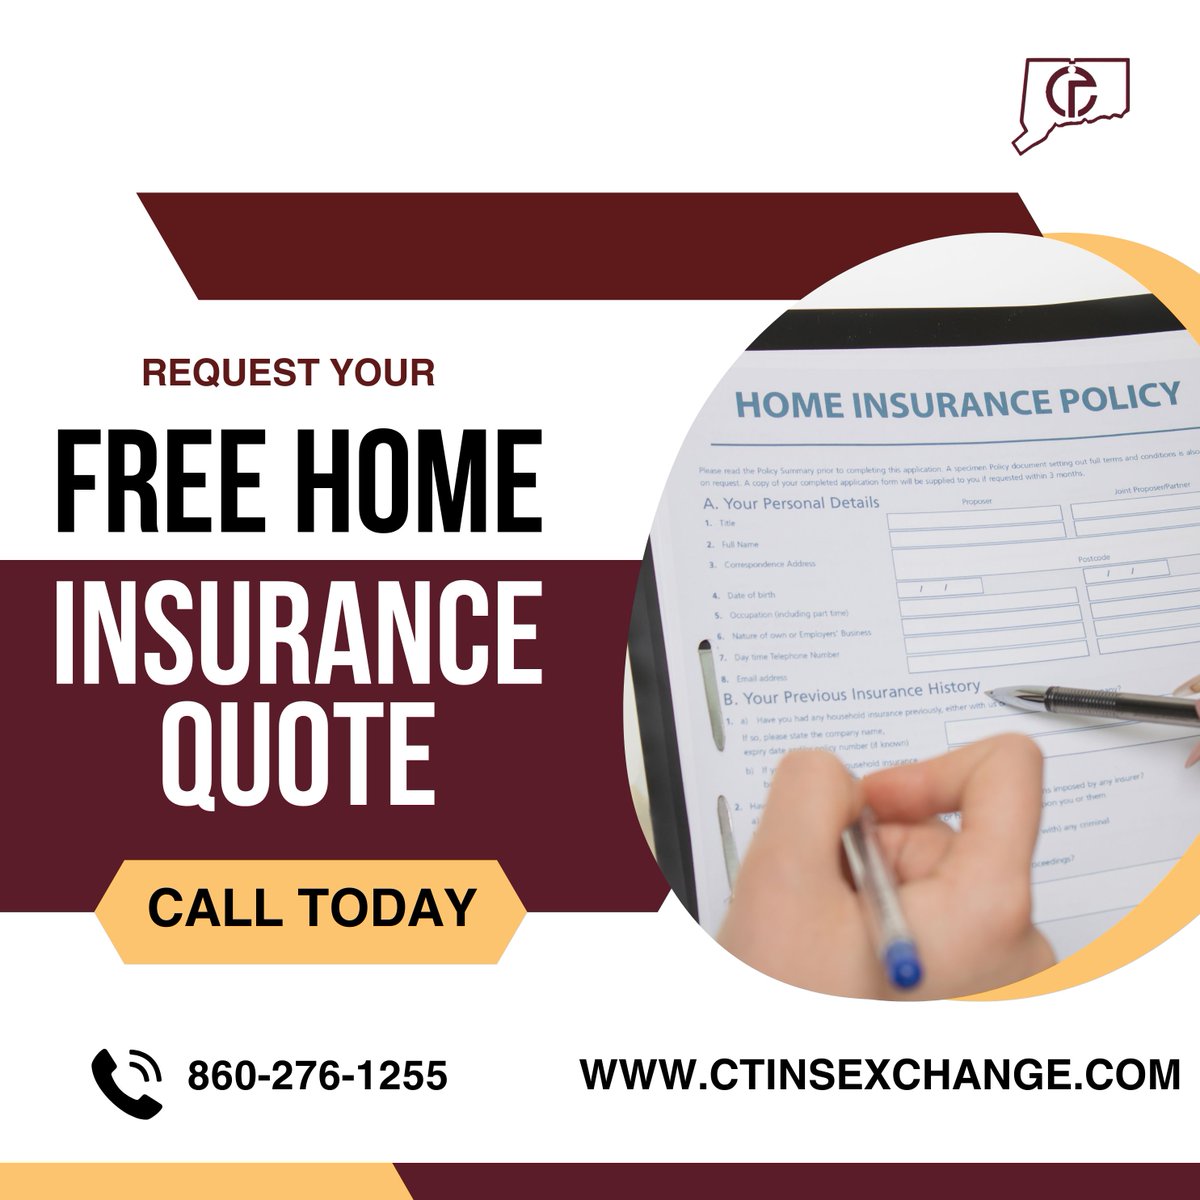 Shield your home with insurance coverage from @cie_southington! 🏡🔐
#ctinsuranceexchangeofsouthington #ctinsuranceprofessionals #personalinsurance #commericalinsurance #ctinsurance #autoinsurance #protectyourbelongings #homeinsurance